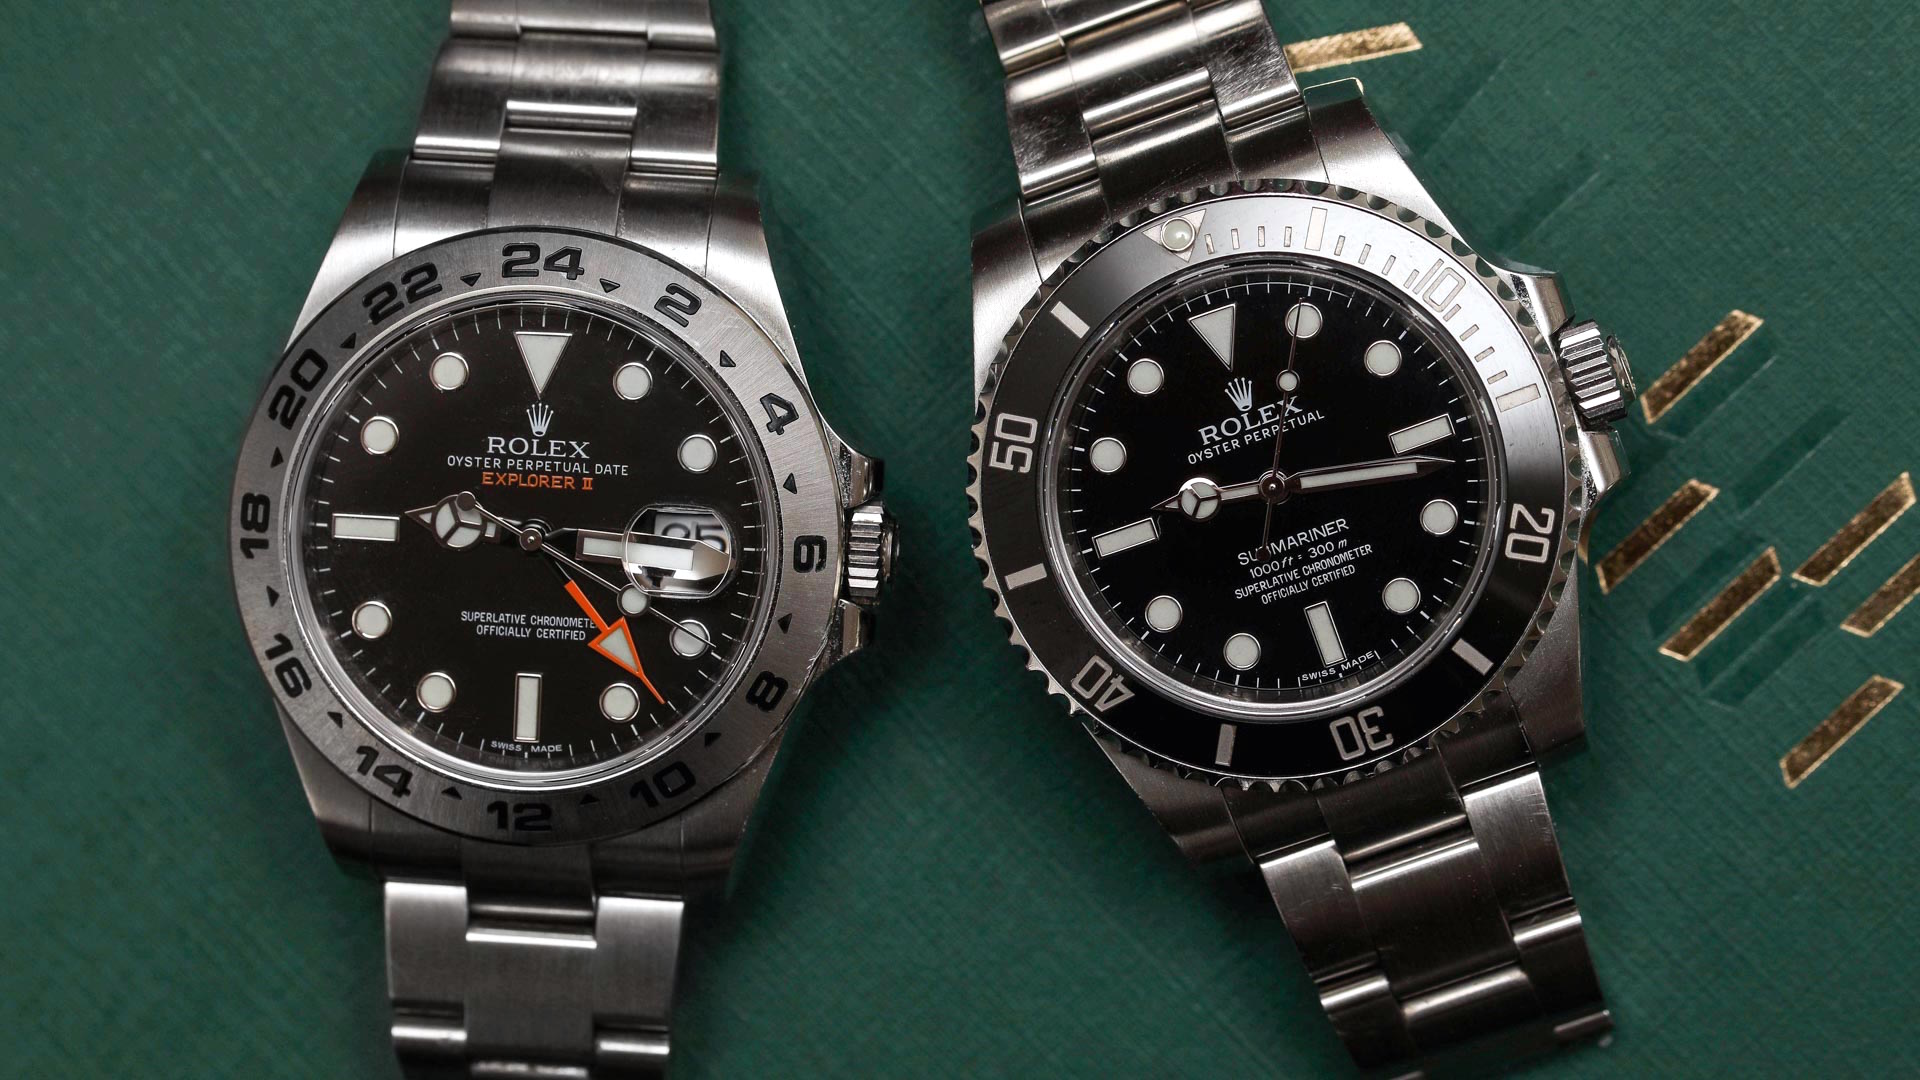 Which Rolex To Buy" The Submariner Vs. Explorer II Watch Comparison Review